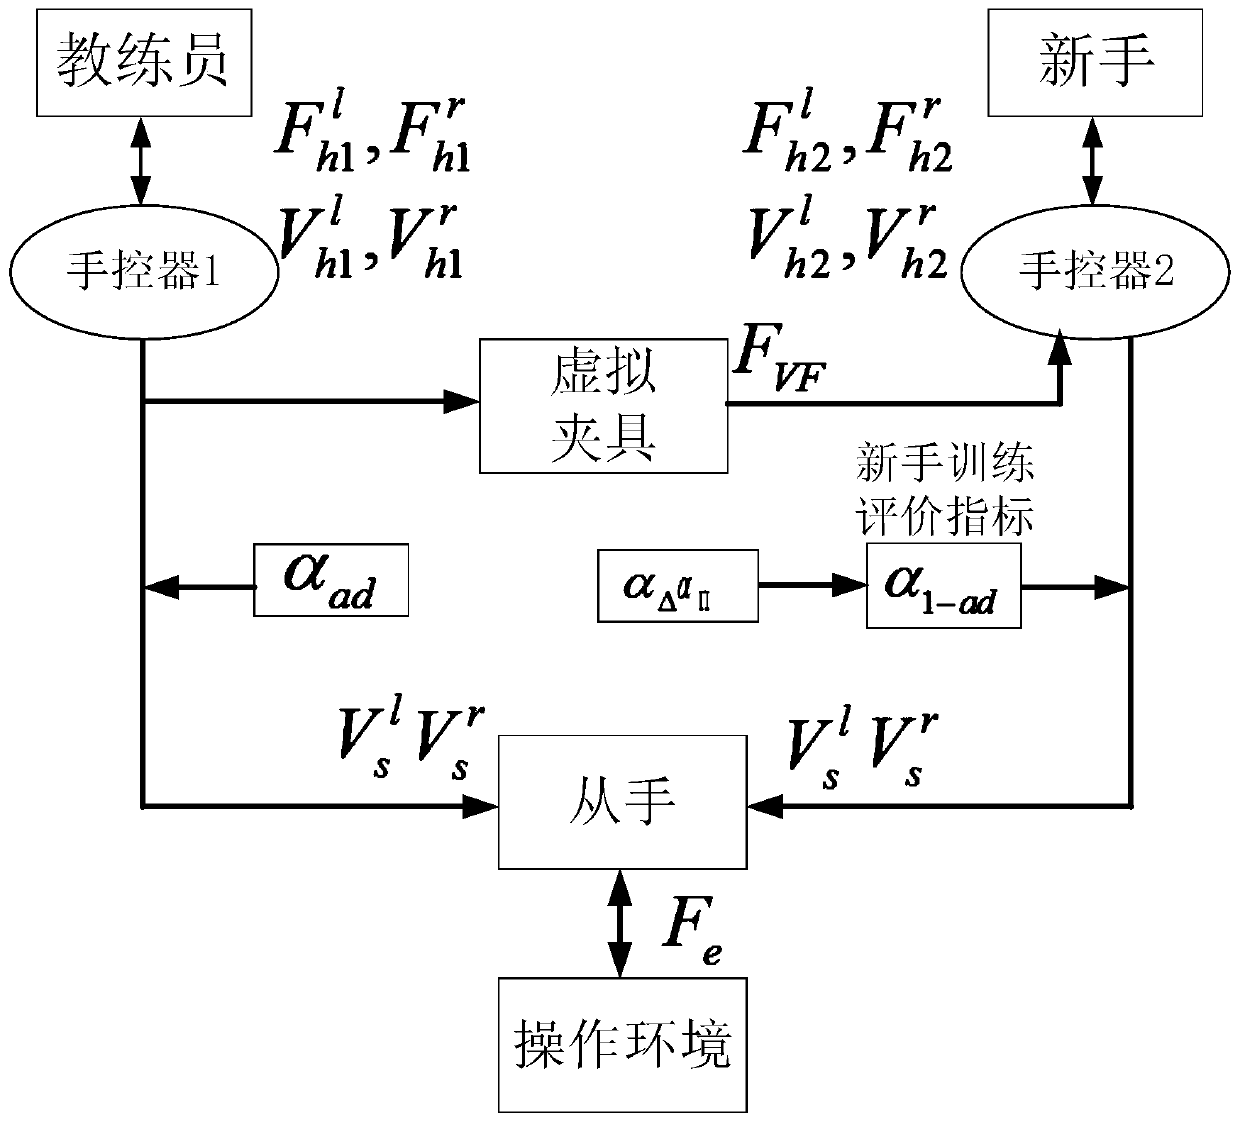 Double-person remote control operation training method based on virtual fixture